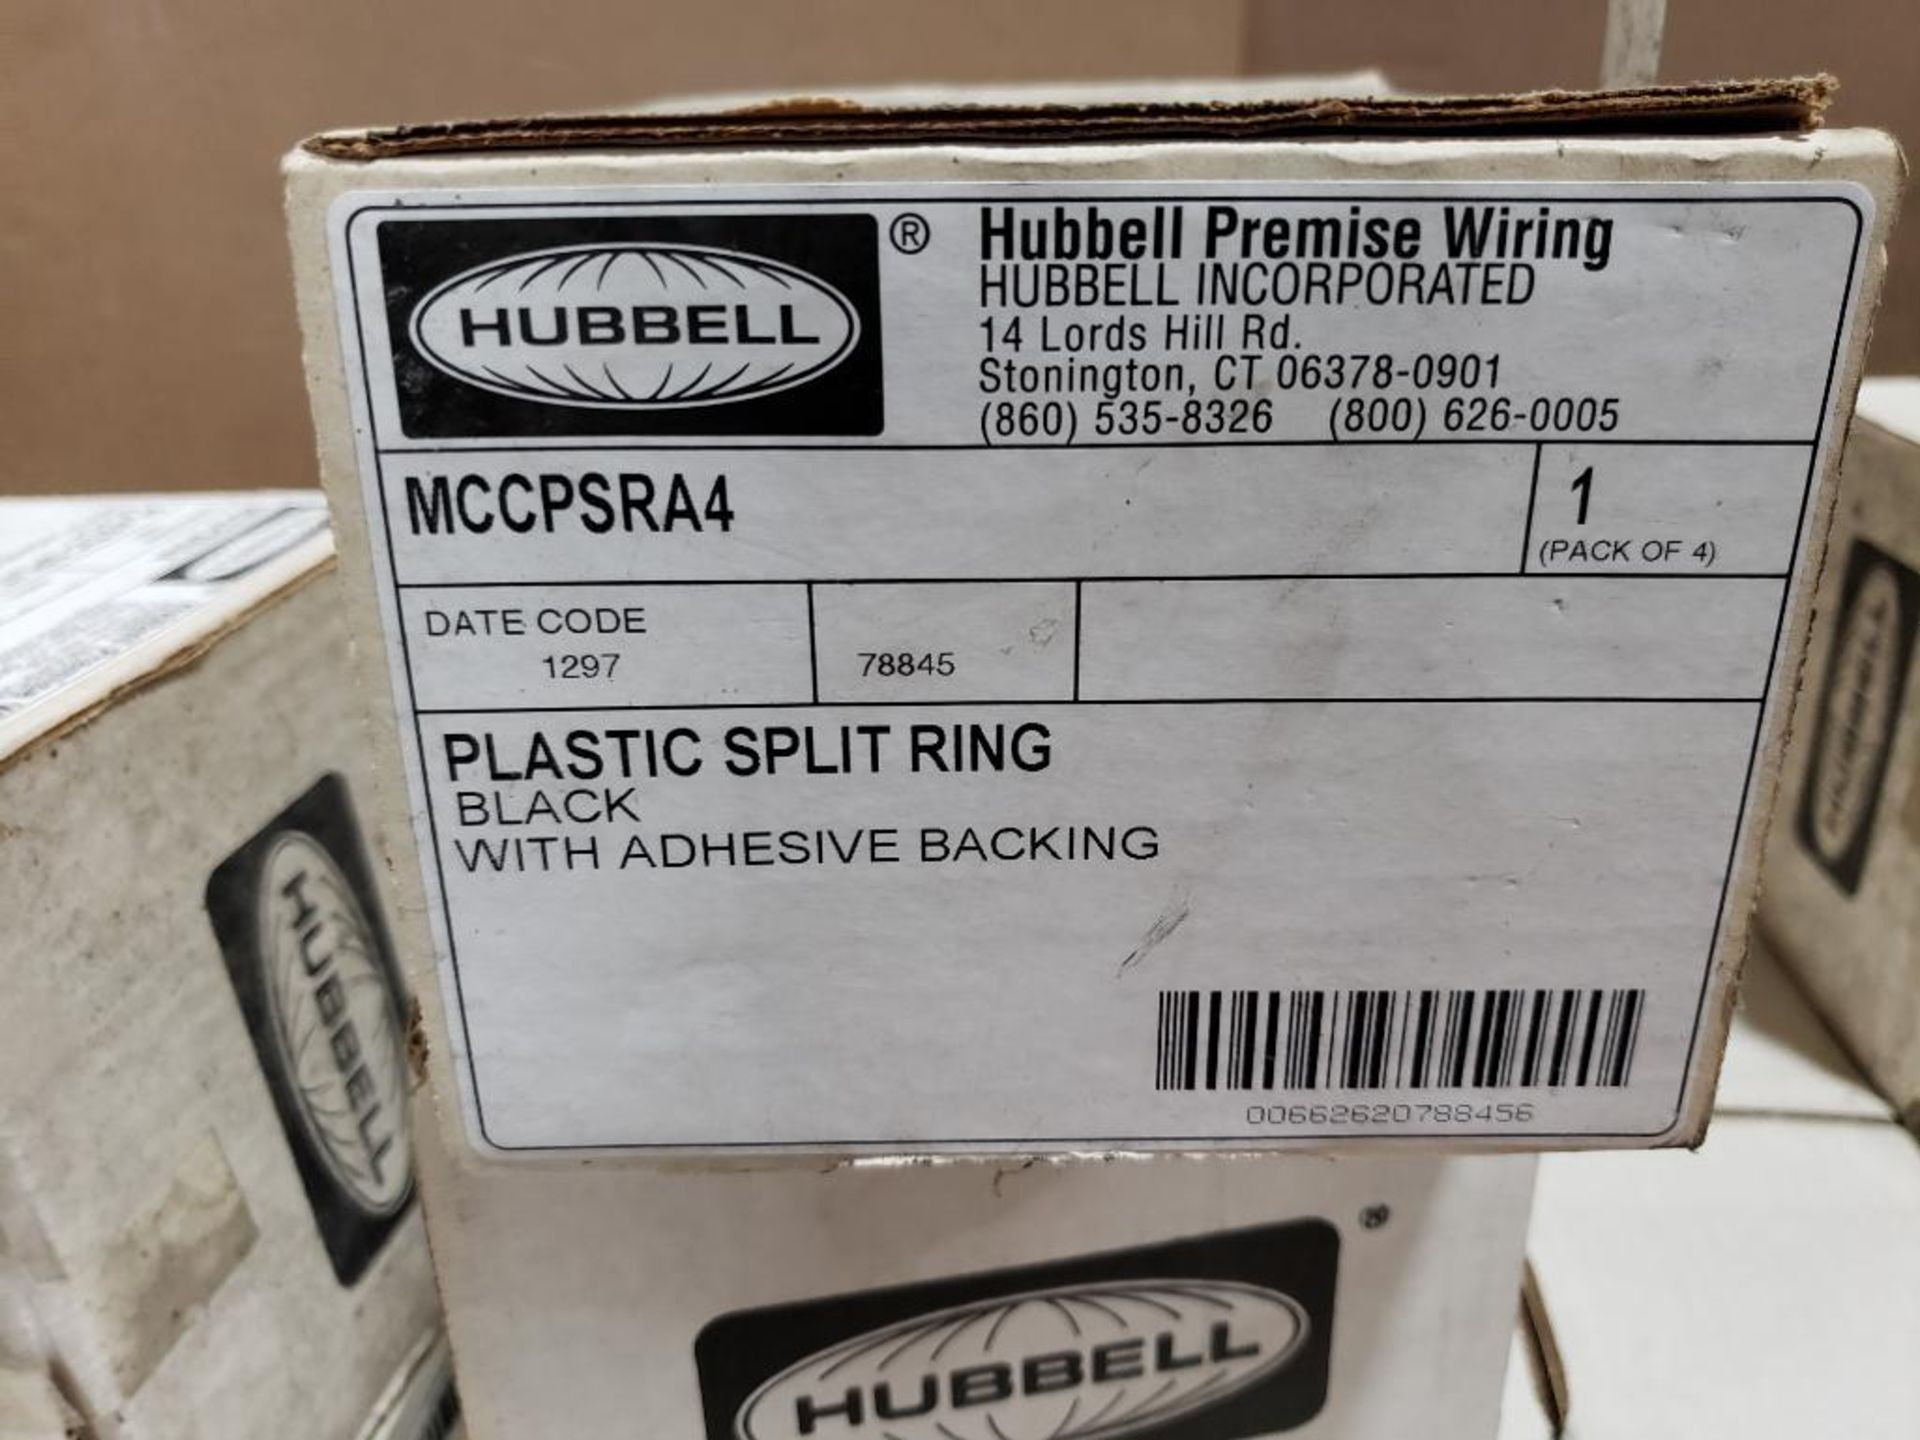 Qty 40 - Hubbell MCCPSRA4 plastic split ring pack of 4 box. - Image 3 of 3